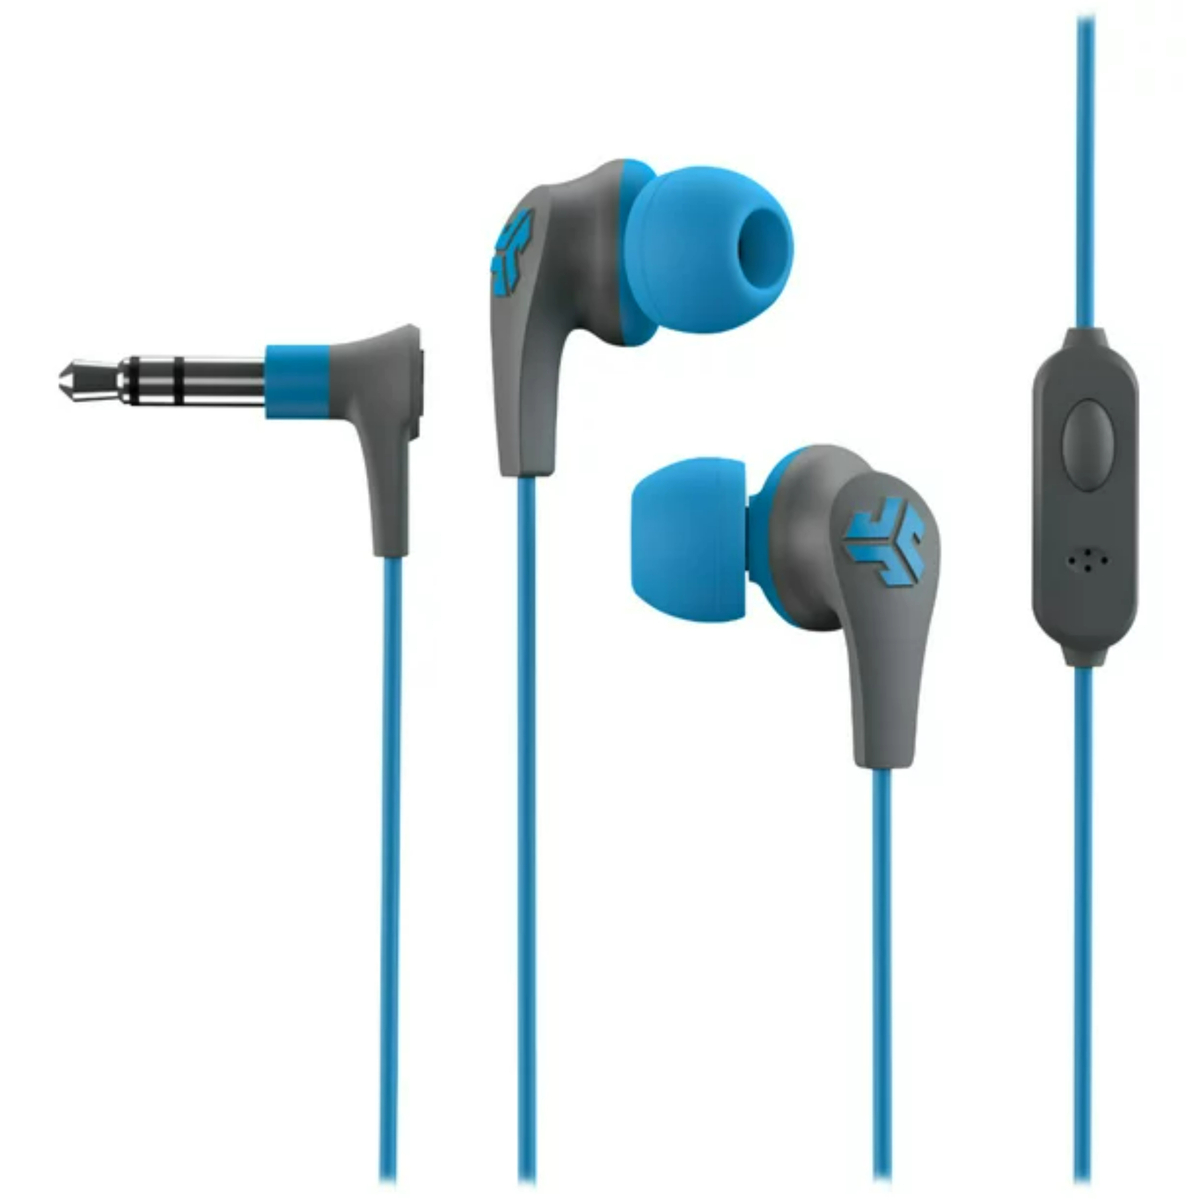 JLab JBuds Pro Signature Wired Earbud Headphones, Gray/Blue Online at ...